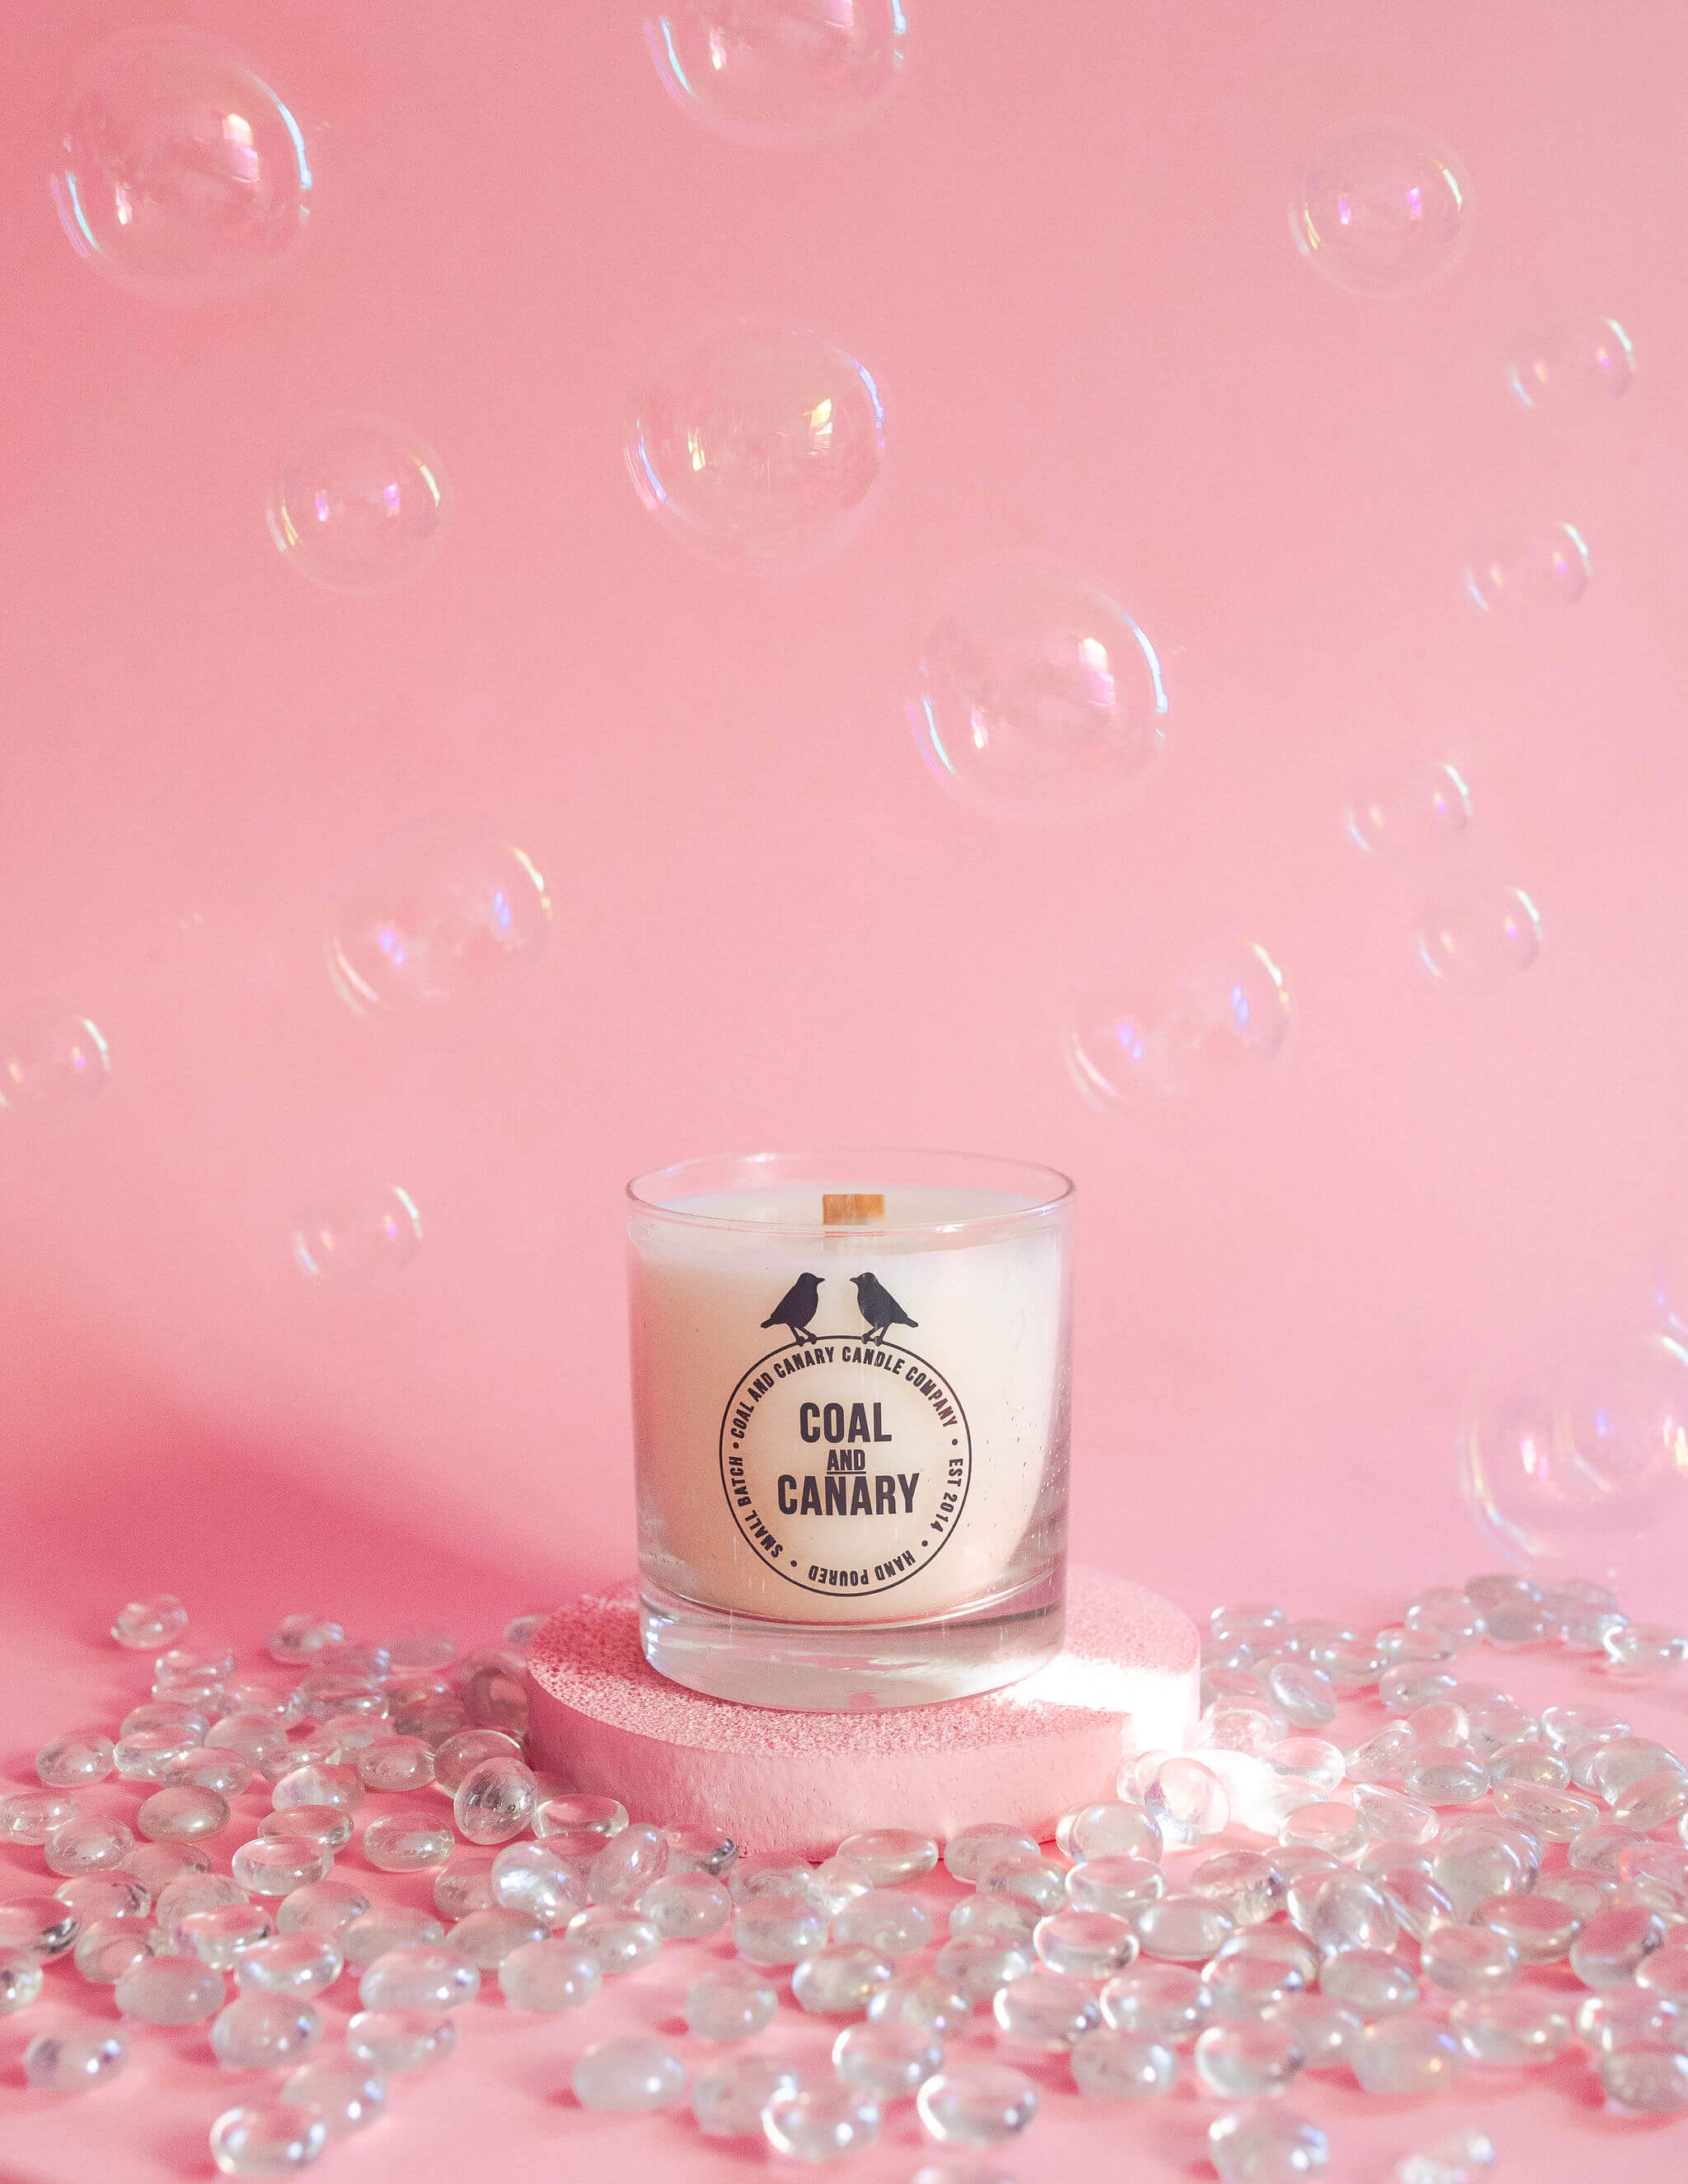 Ingredients that Smell Good with Coal and Canary photo of a single candle against a pink backdrop